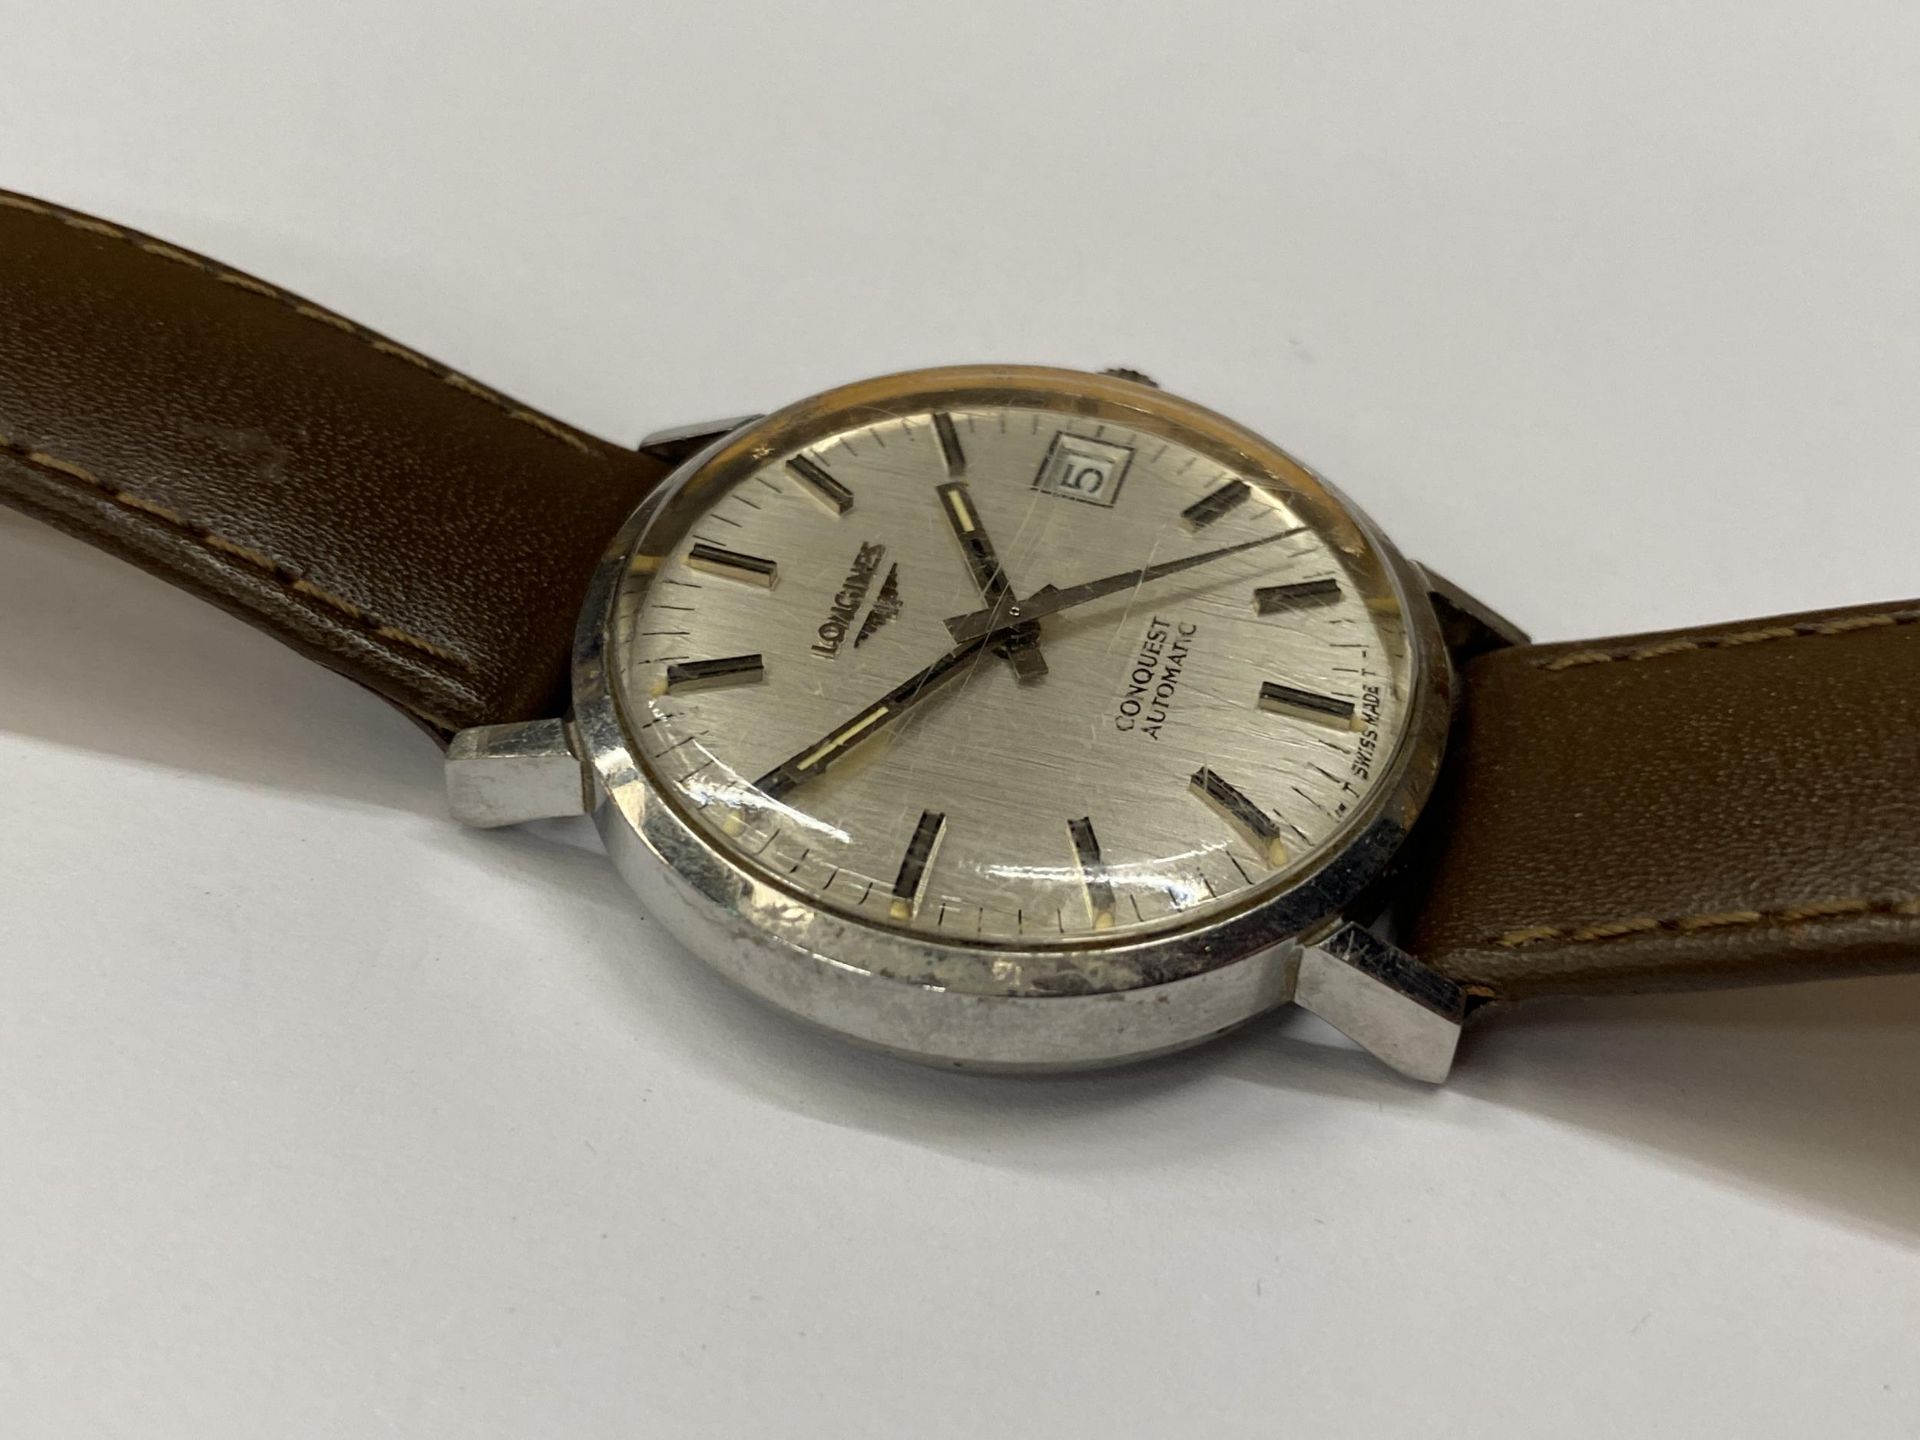 A VINTAGE LONGINES CONQUEST AUTOMATIC WRIST WATCH WITH LEATHER STRAP SEEN WORKING BUT NO WARRANTY - Image 3 of 6